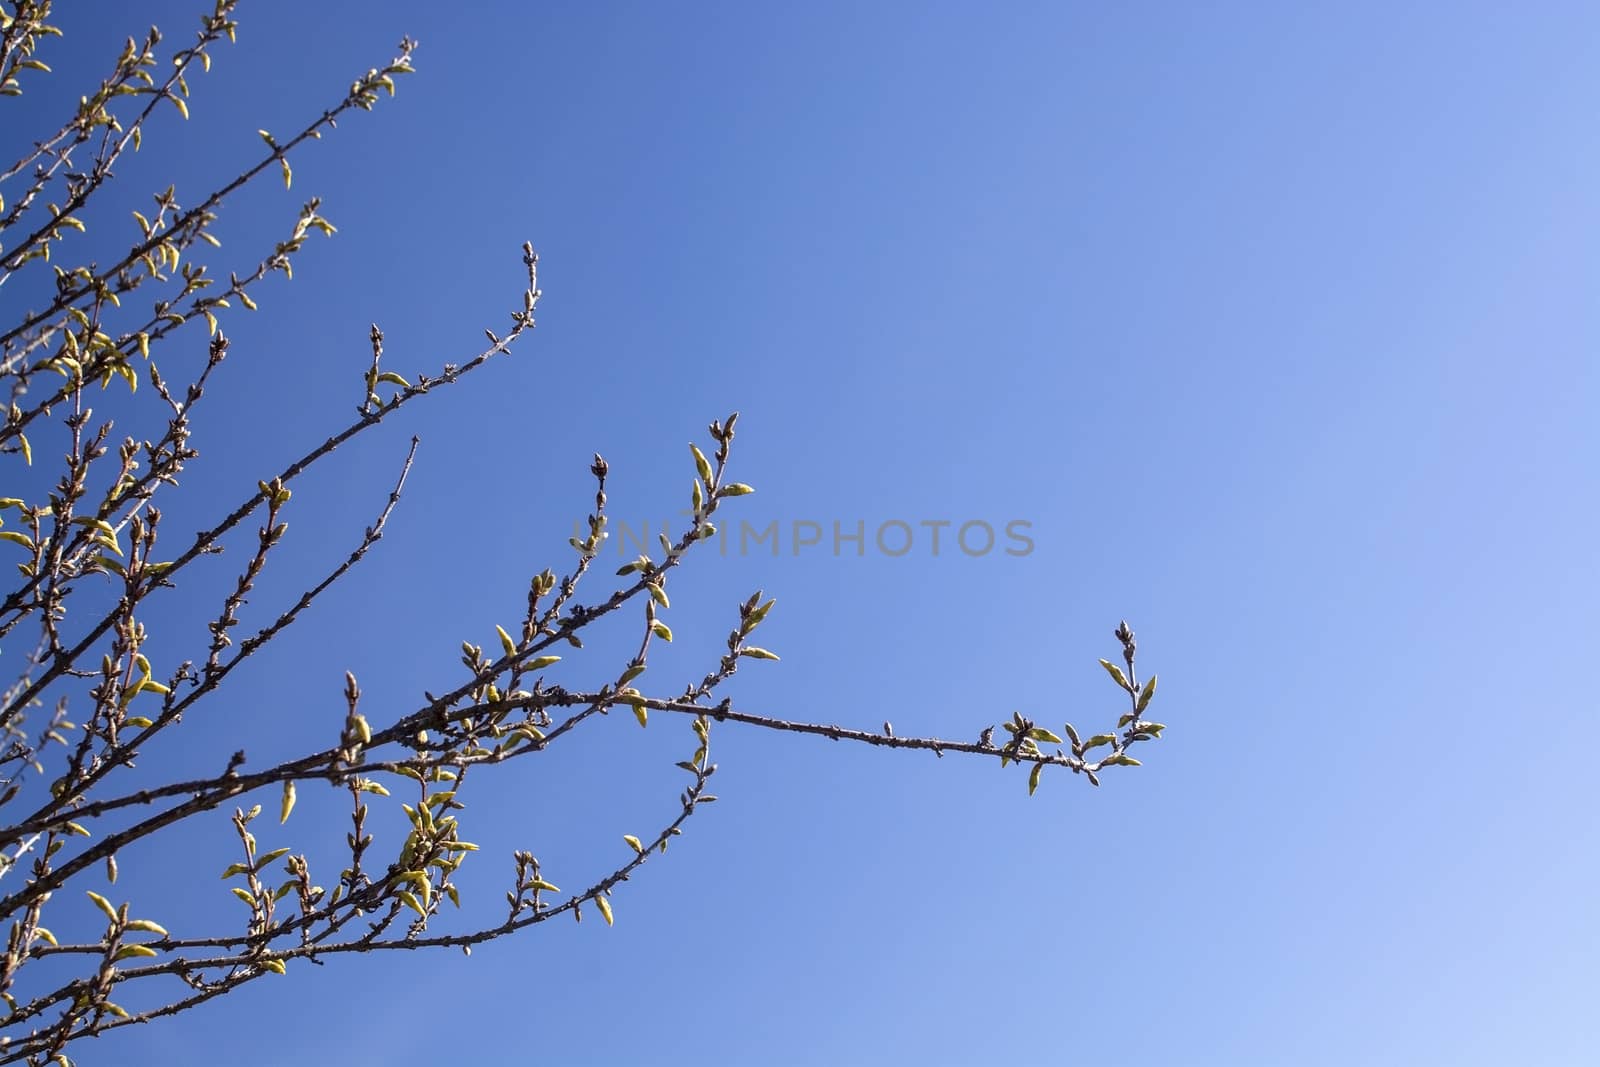 Spring tree branches with an abundance of buds against blue sky on a sunny spring day in April, Sweden.